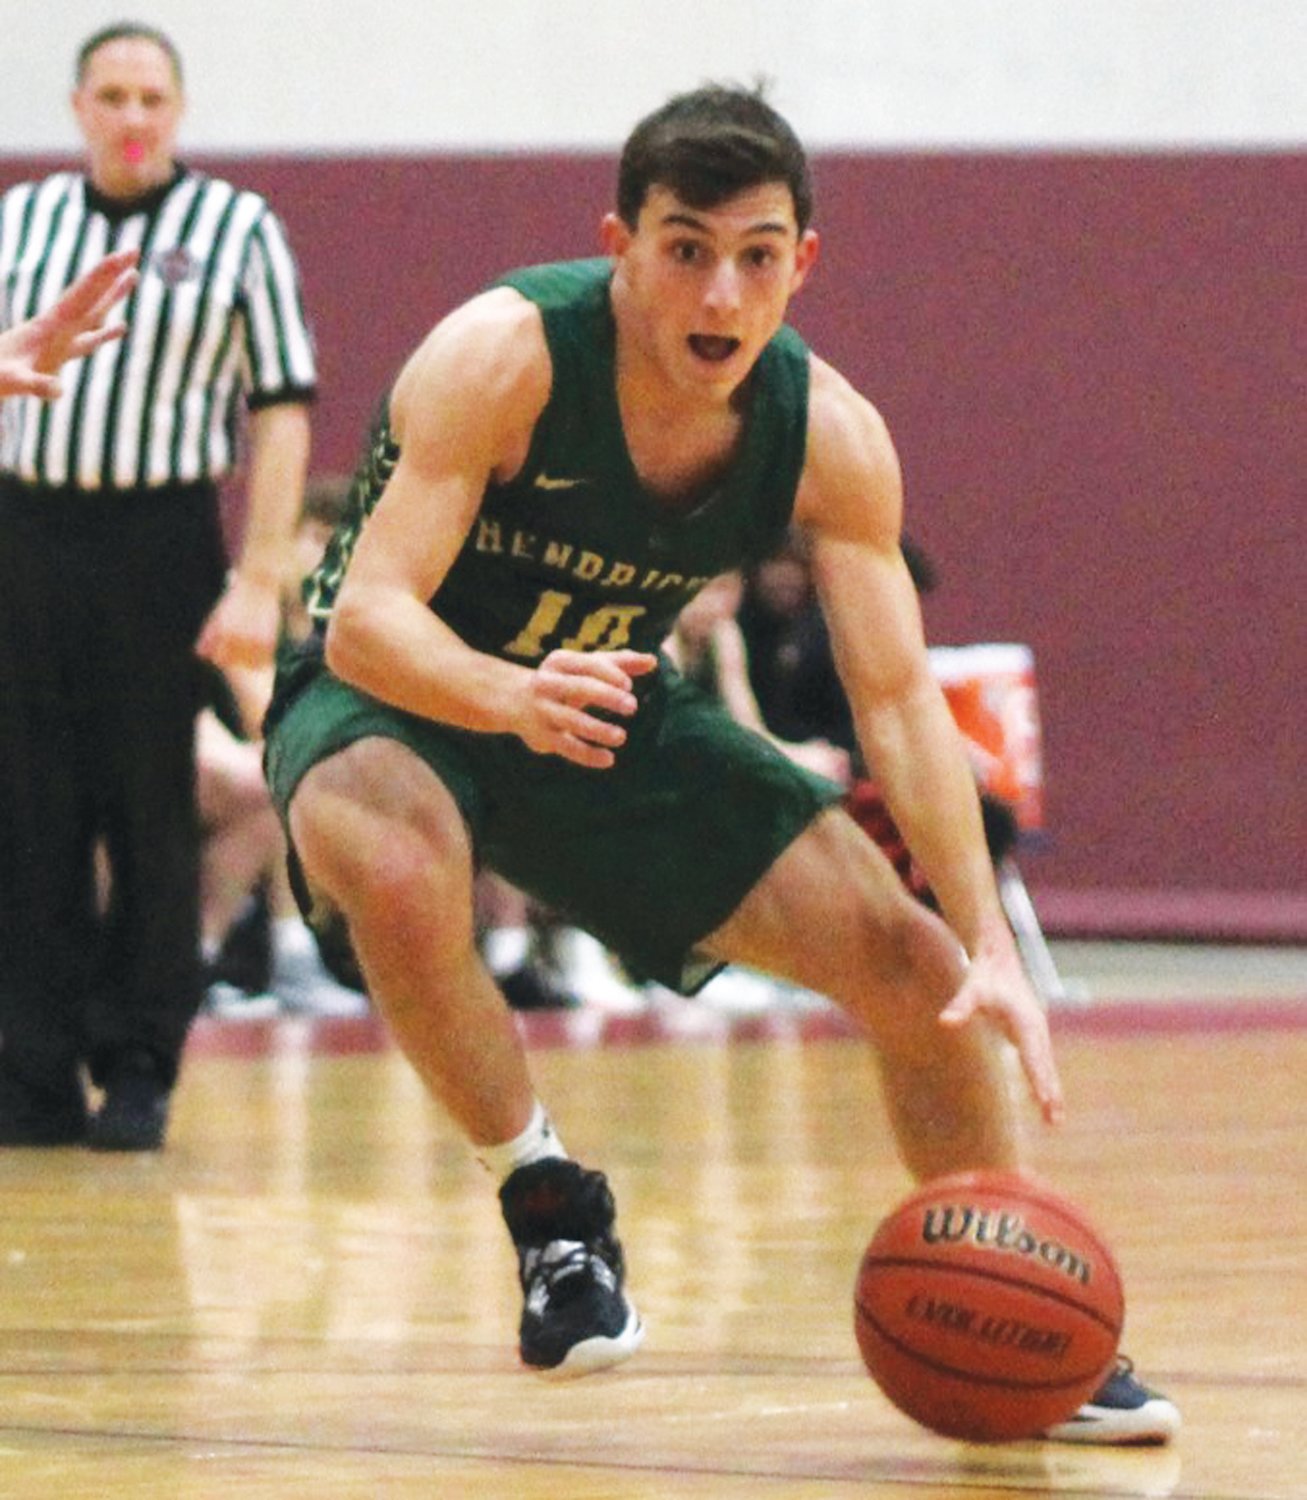 POINT GUARD: Hendricken’s Mike Paquette handles the ball against Central. (Photos by Ryan D. Murray)